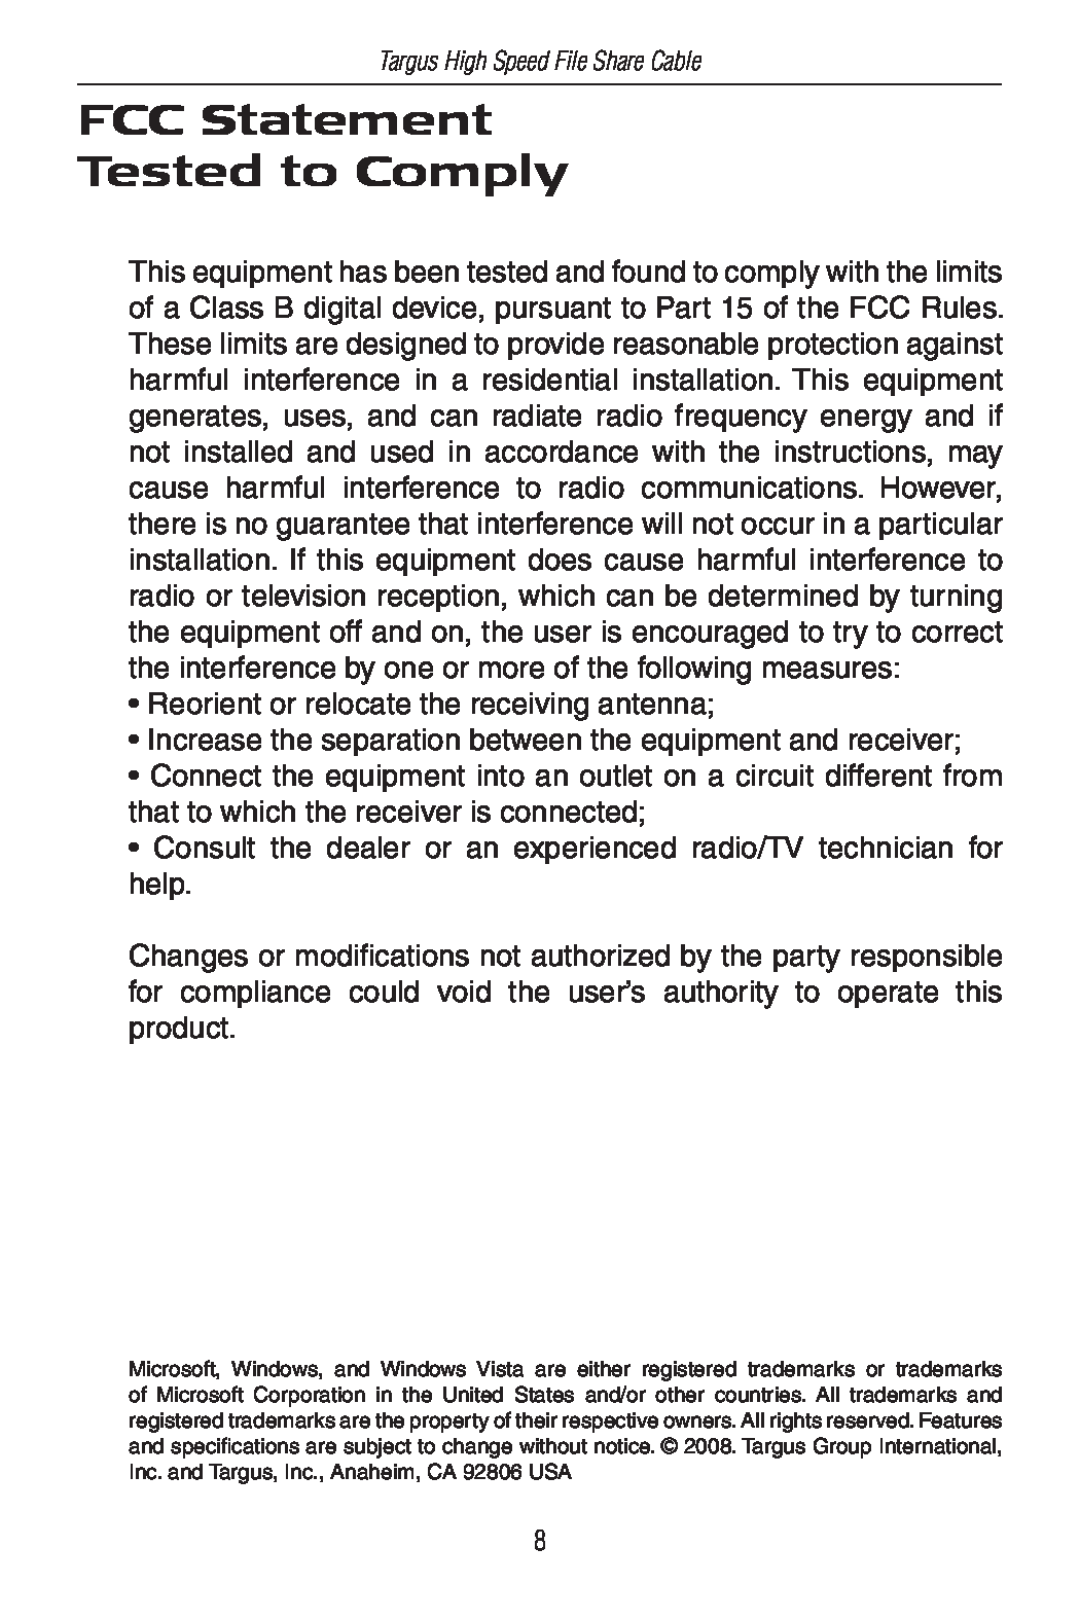 Targus ACC96US specifications FCC Statement Tested to Comply, Reorient or relocate the receiving antenna 